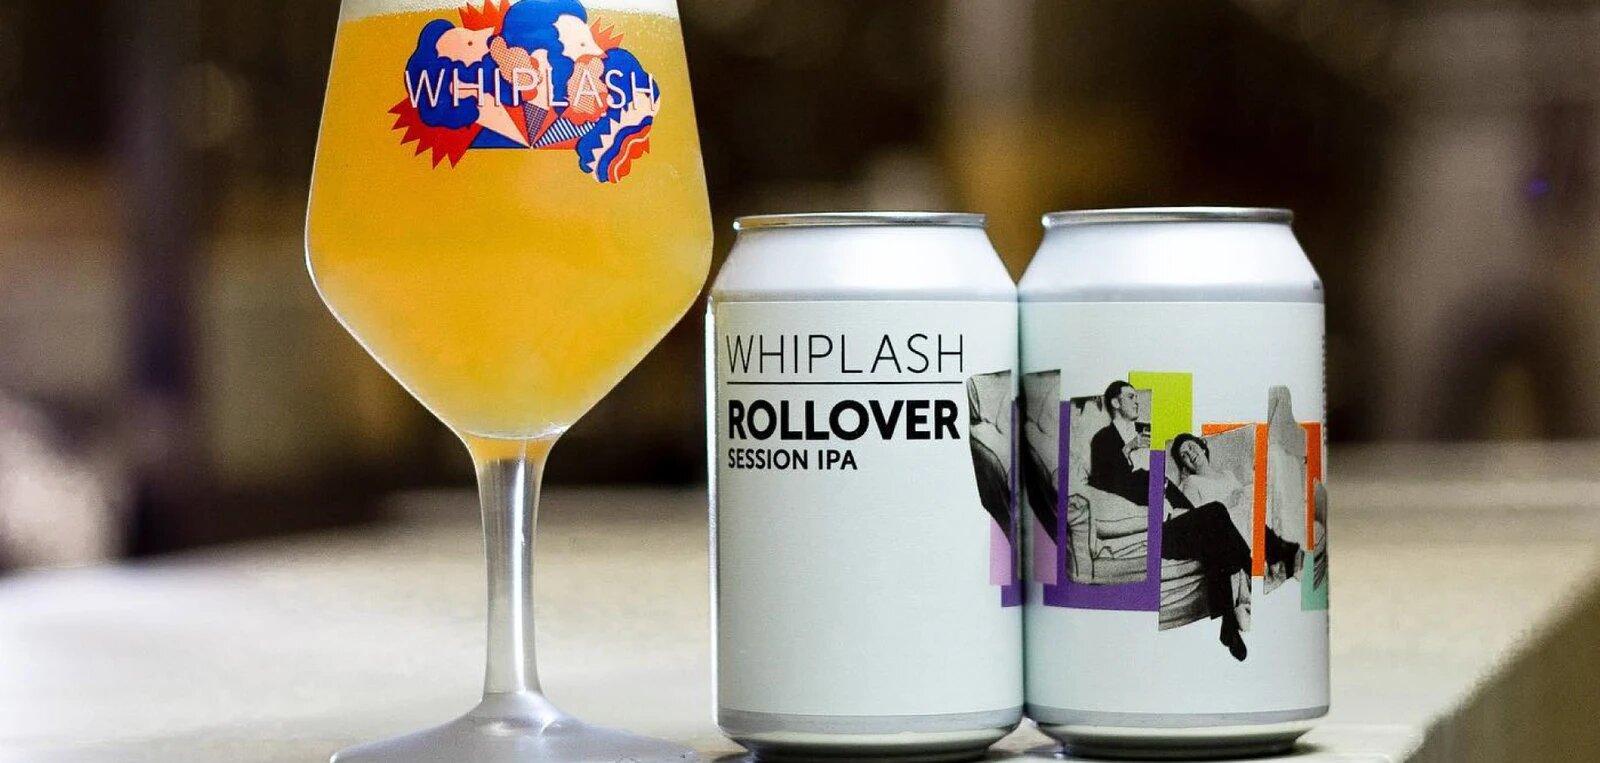 Rollover, Whiplash famous Session IPA